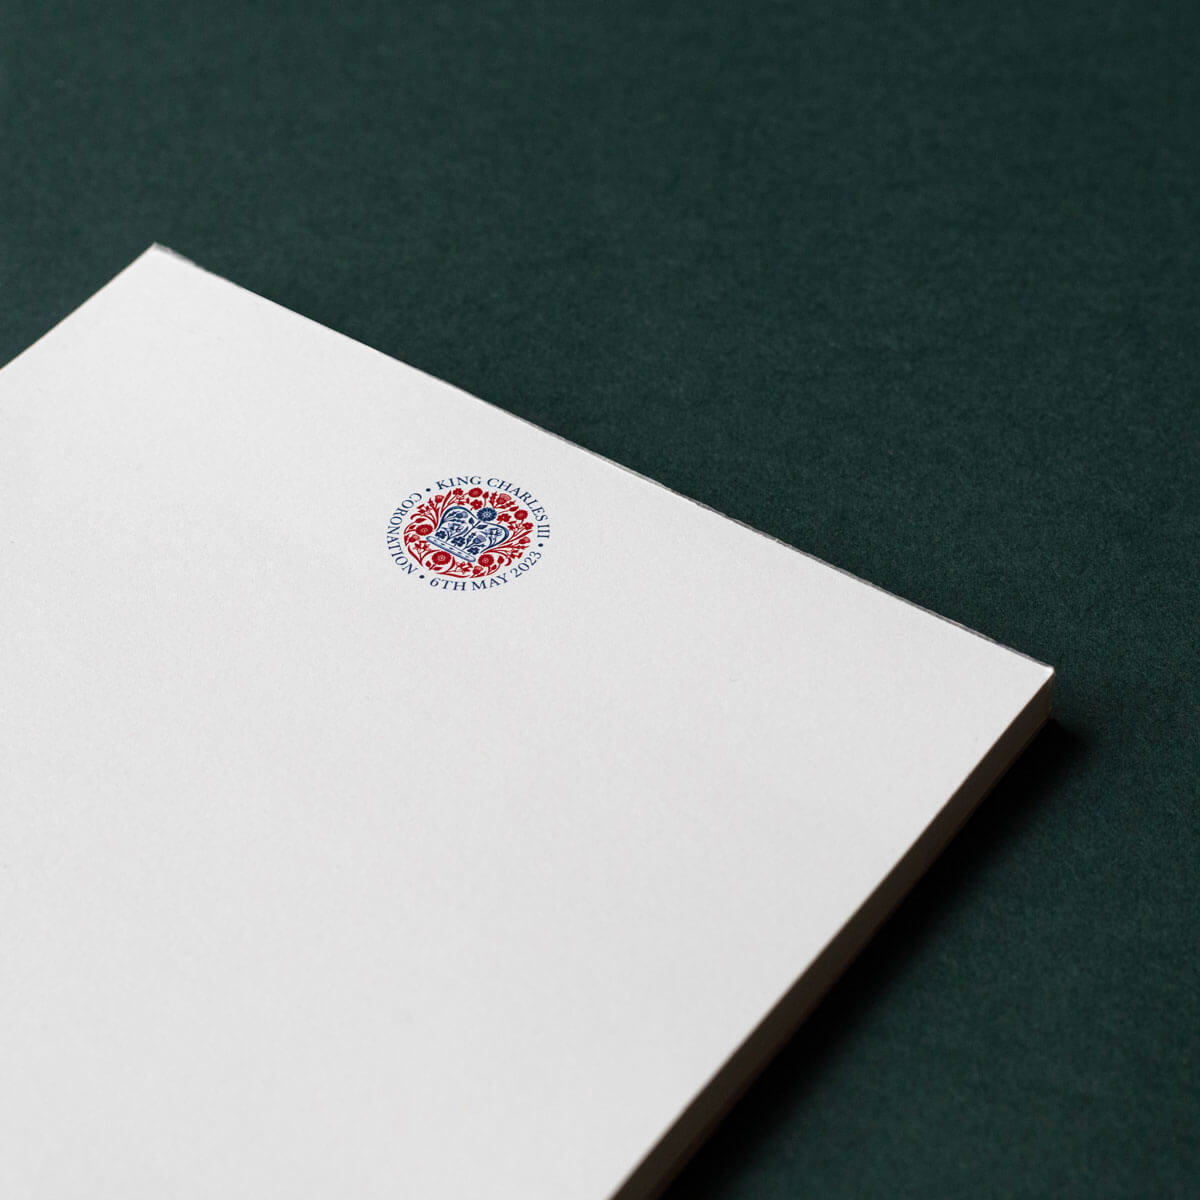 red and blue logo on white paper notepad printed with king charles coronation logo